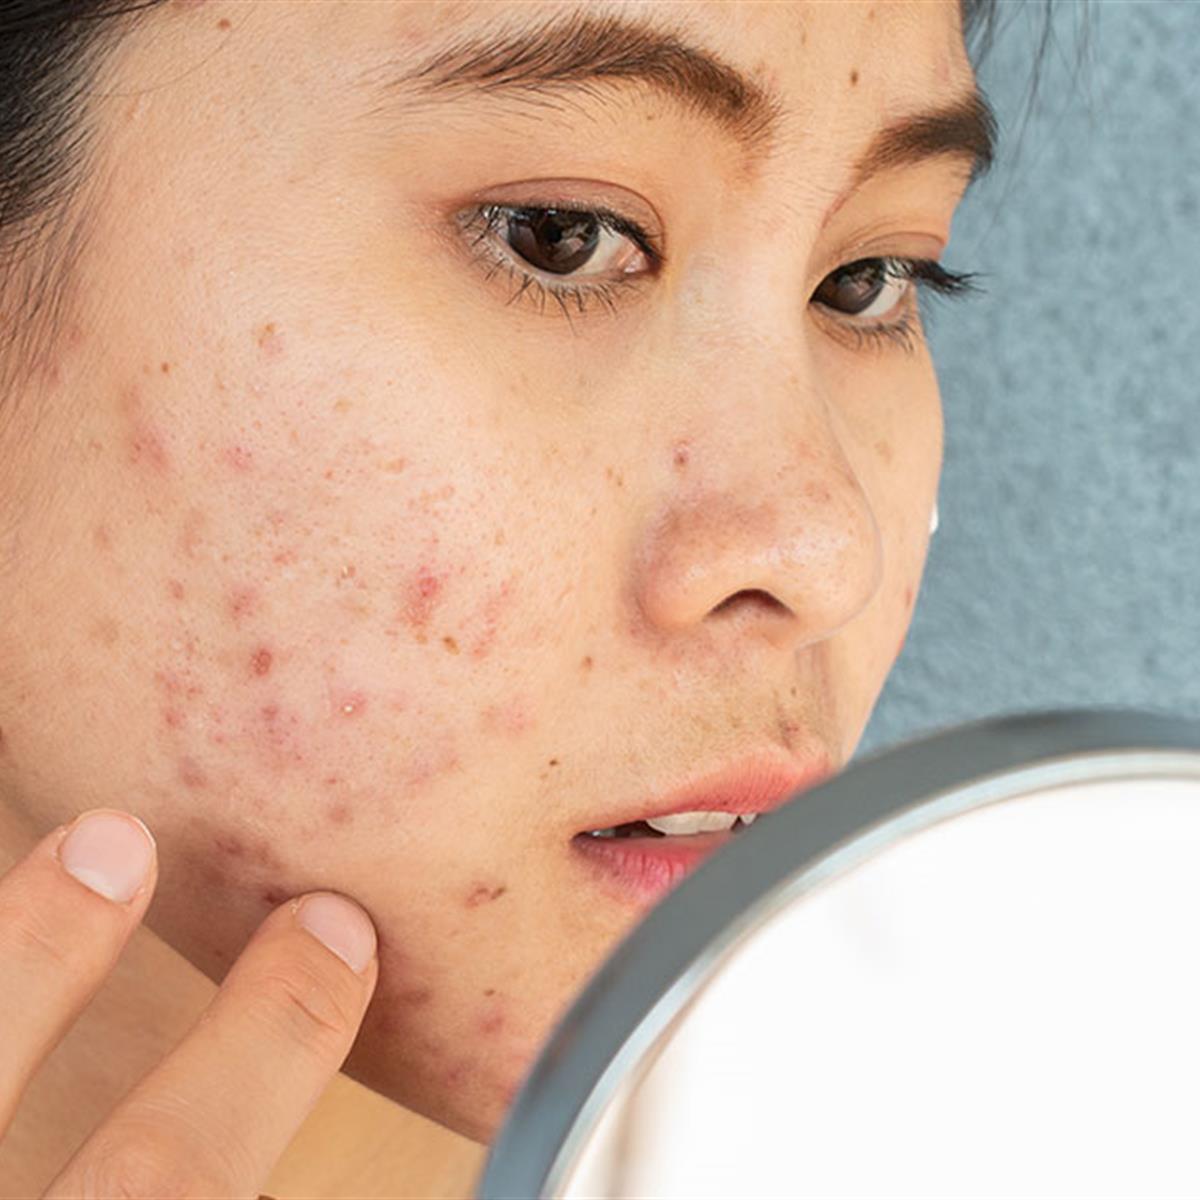 Acne treatment for teenagers